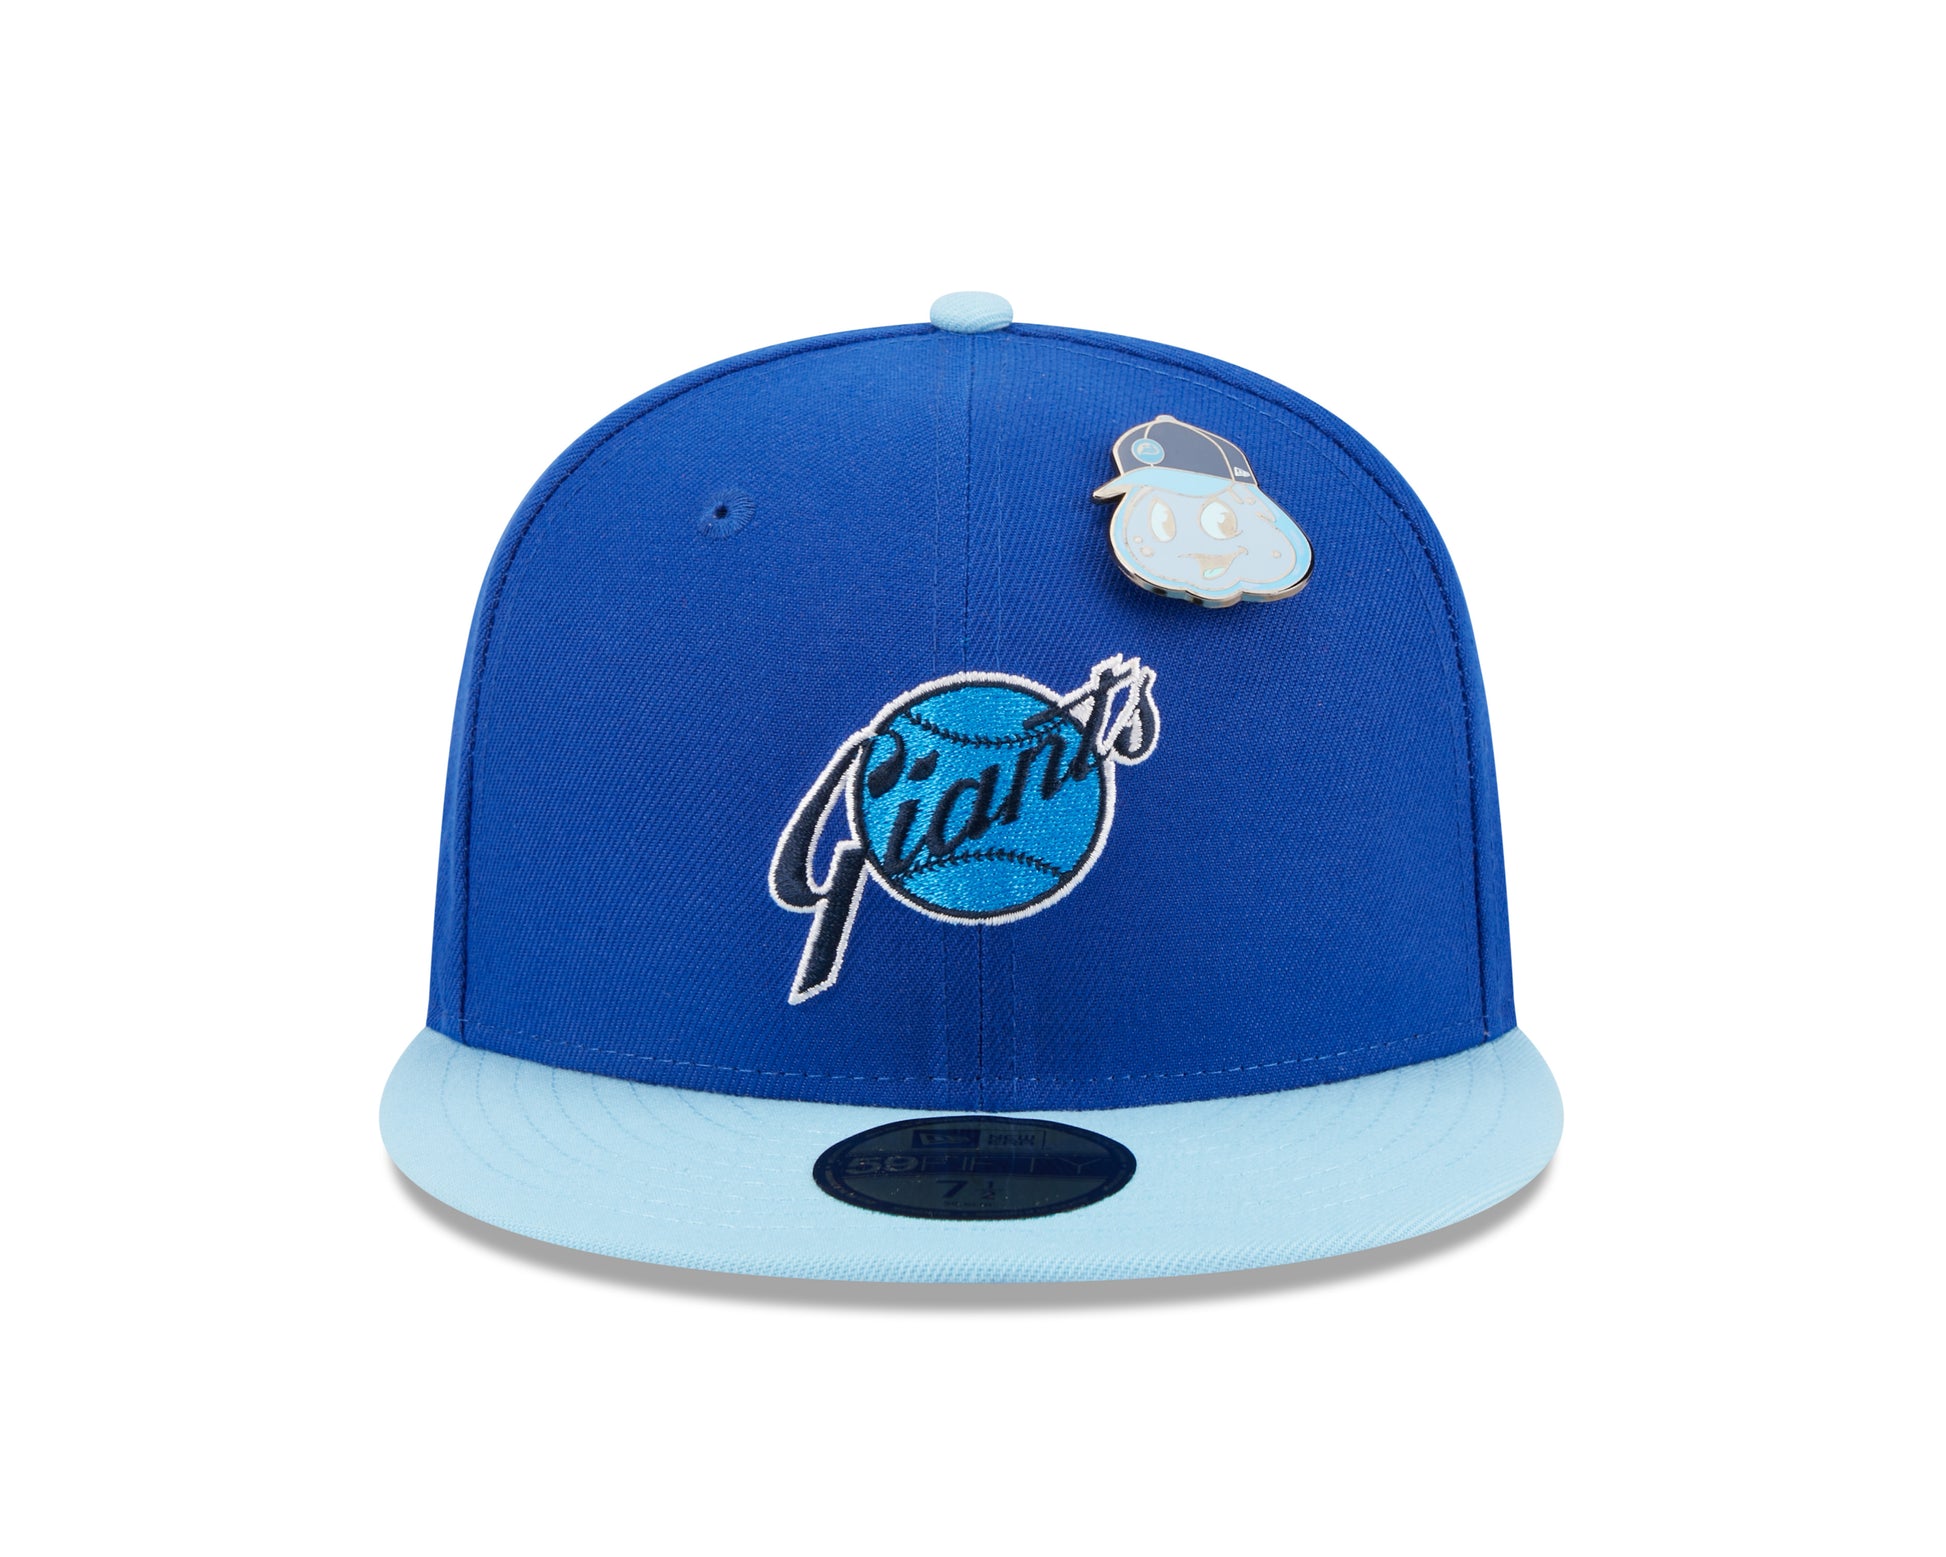 New Era 59fifty Fitted Cap San Francisco Giants Cooperstown THE ELEMENTS - Blue/Sky Blue - Headz Up 